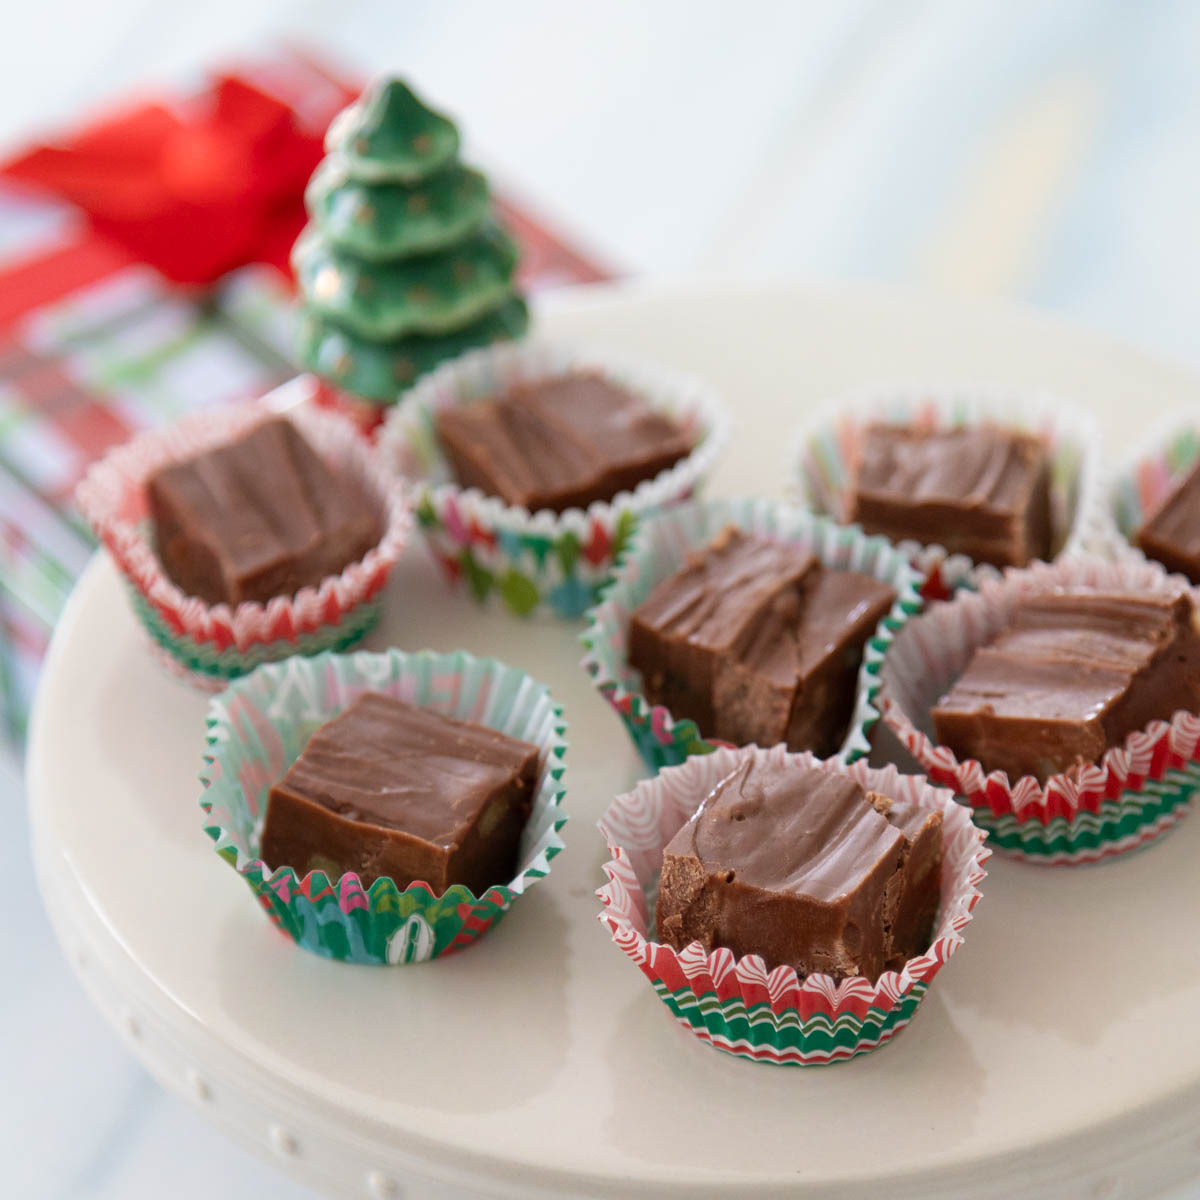 The squares of fudge are served on a pretty cake plate with a Christmas tree accent.